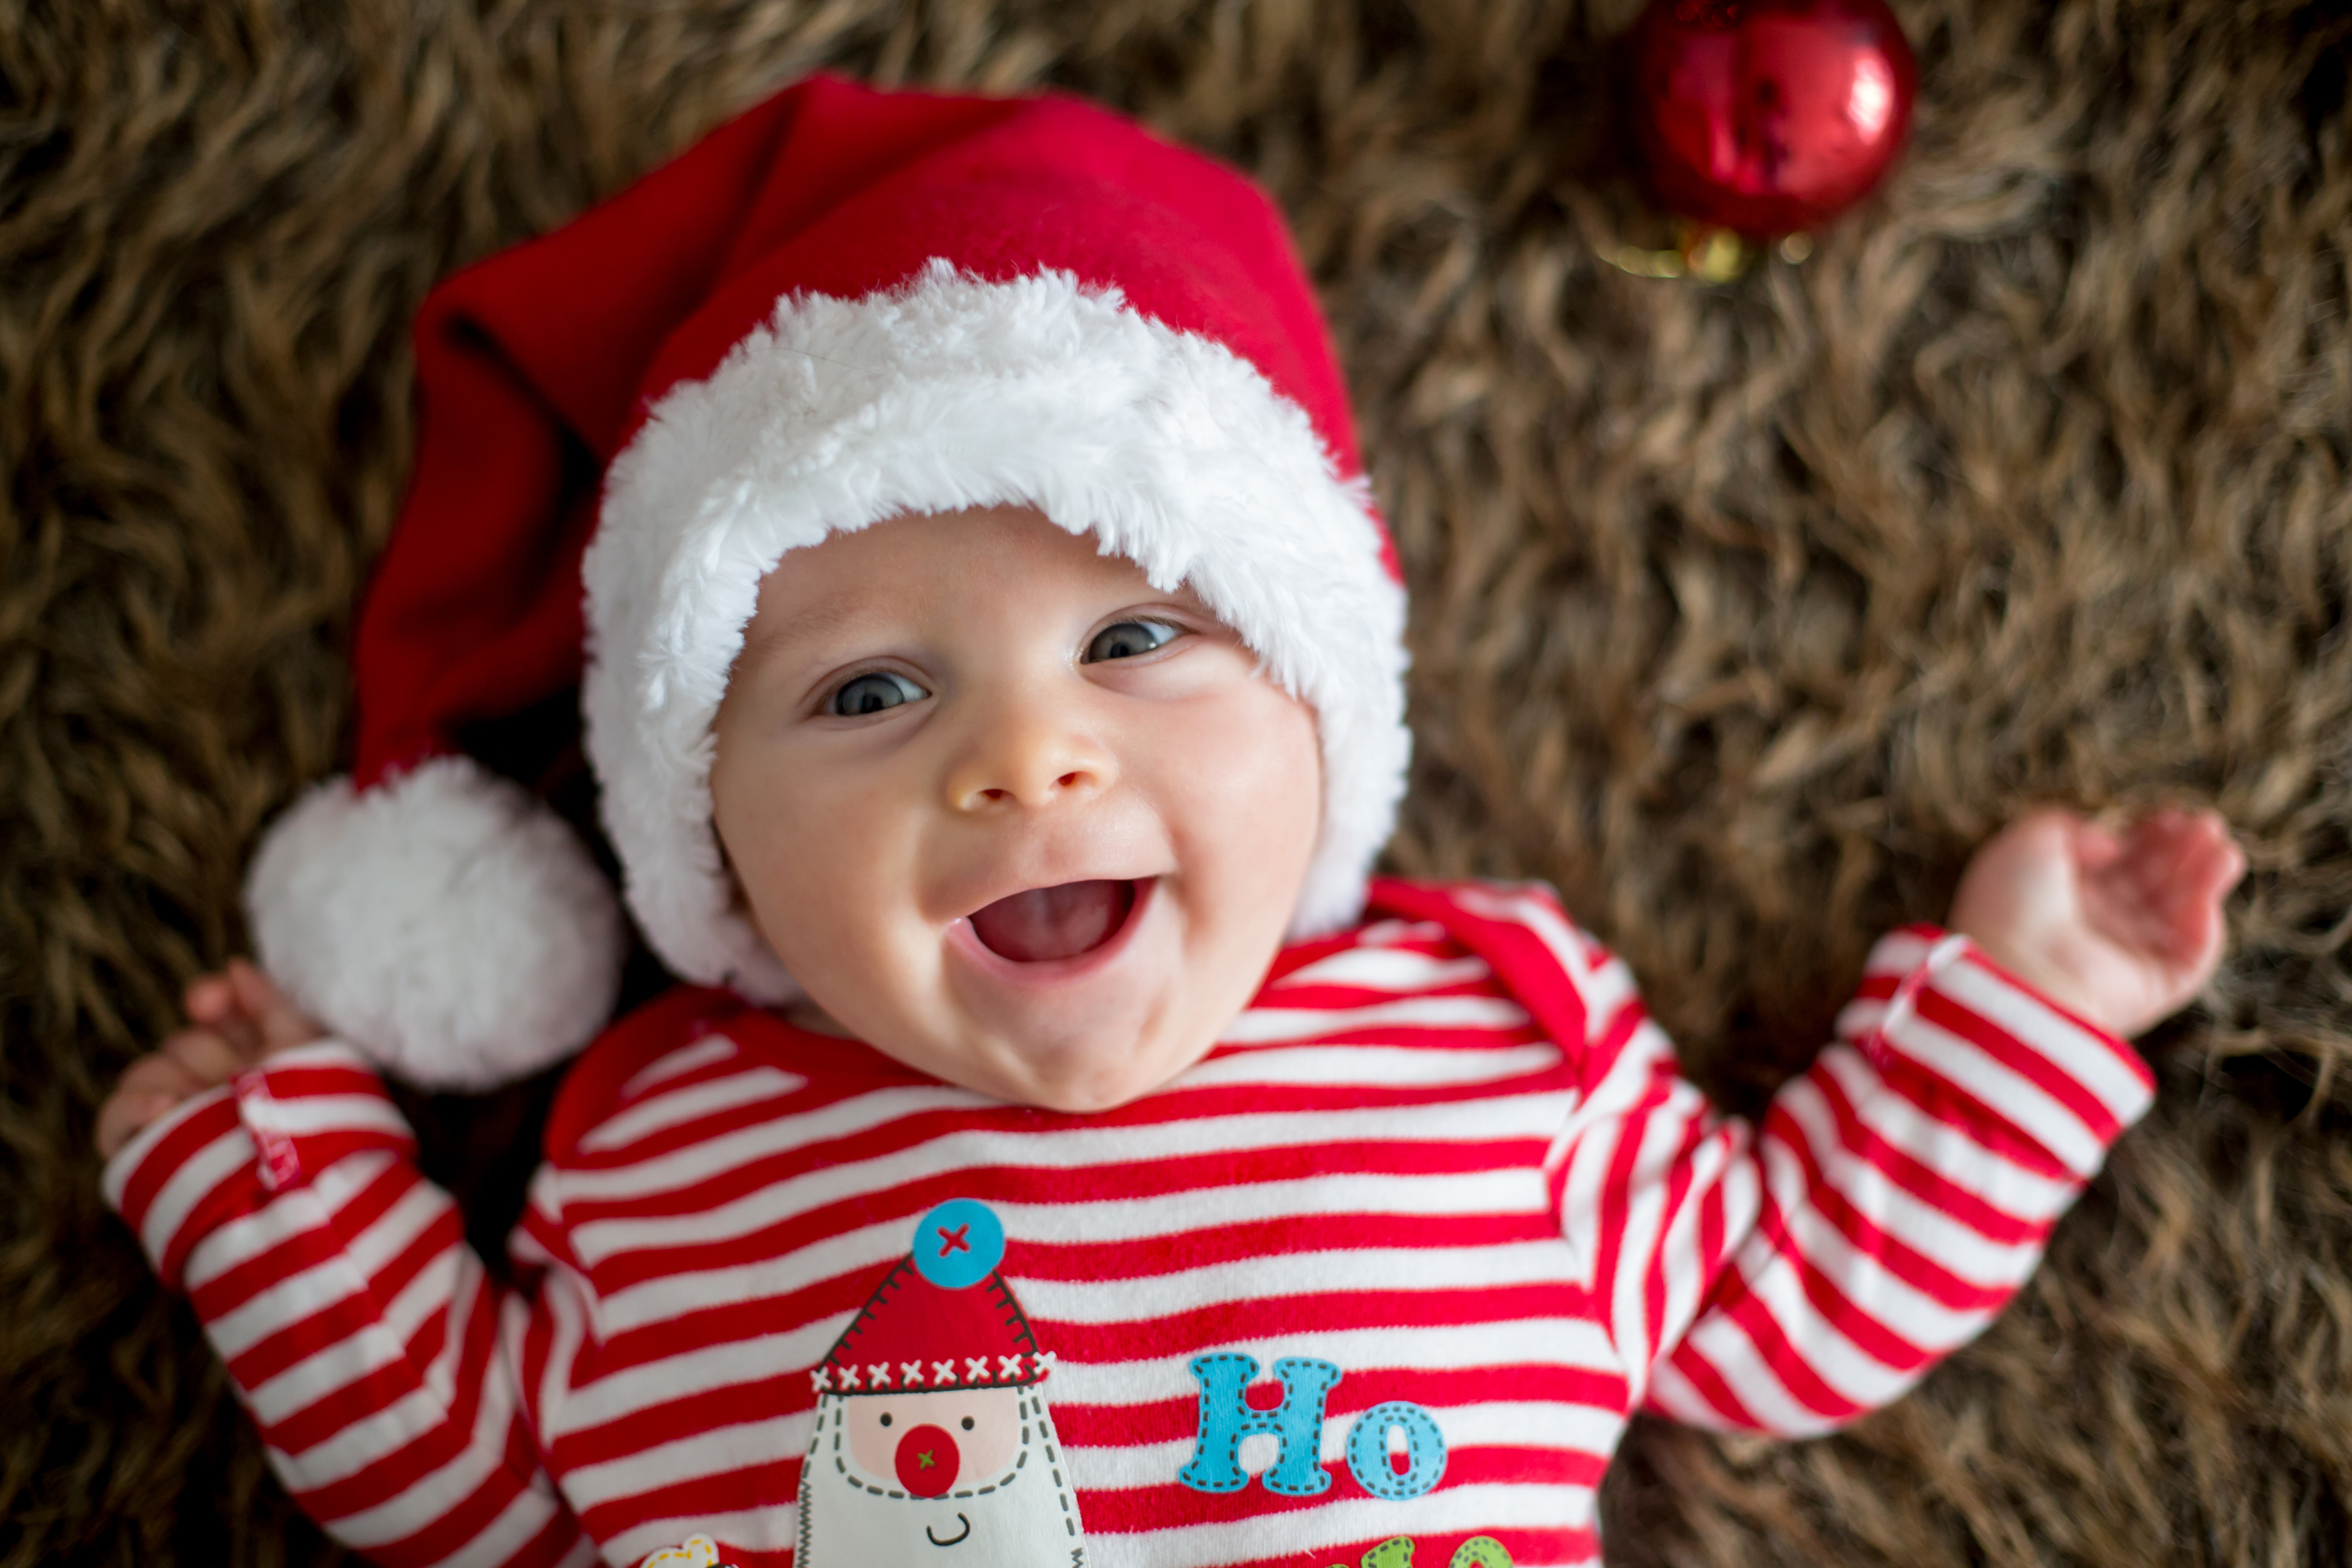 This beautiful keepsake is the perfect gift for baby’s first Christmas